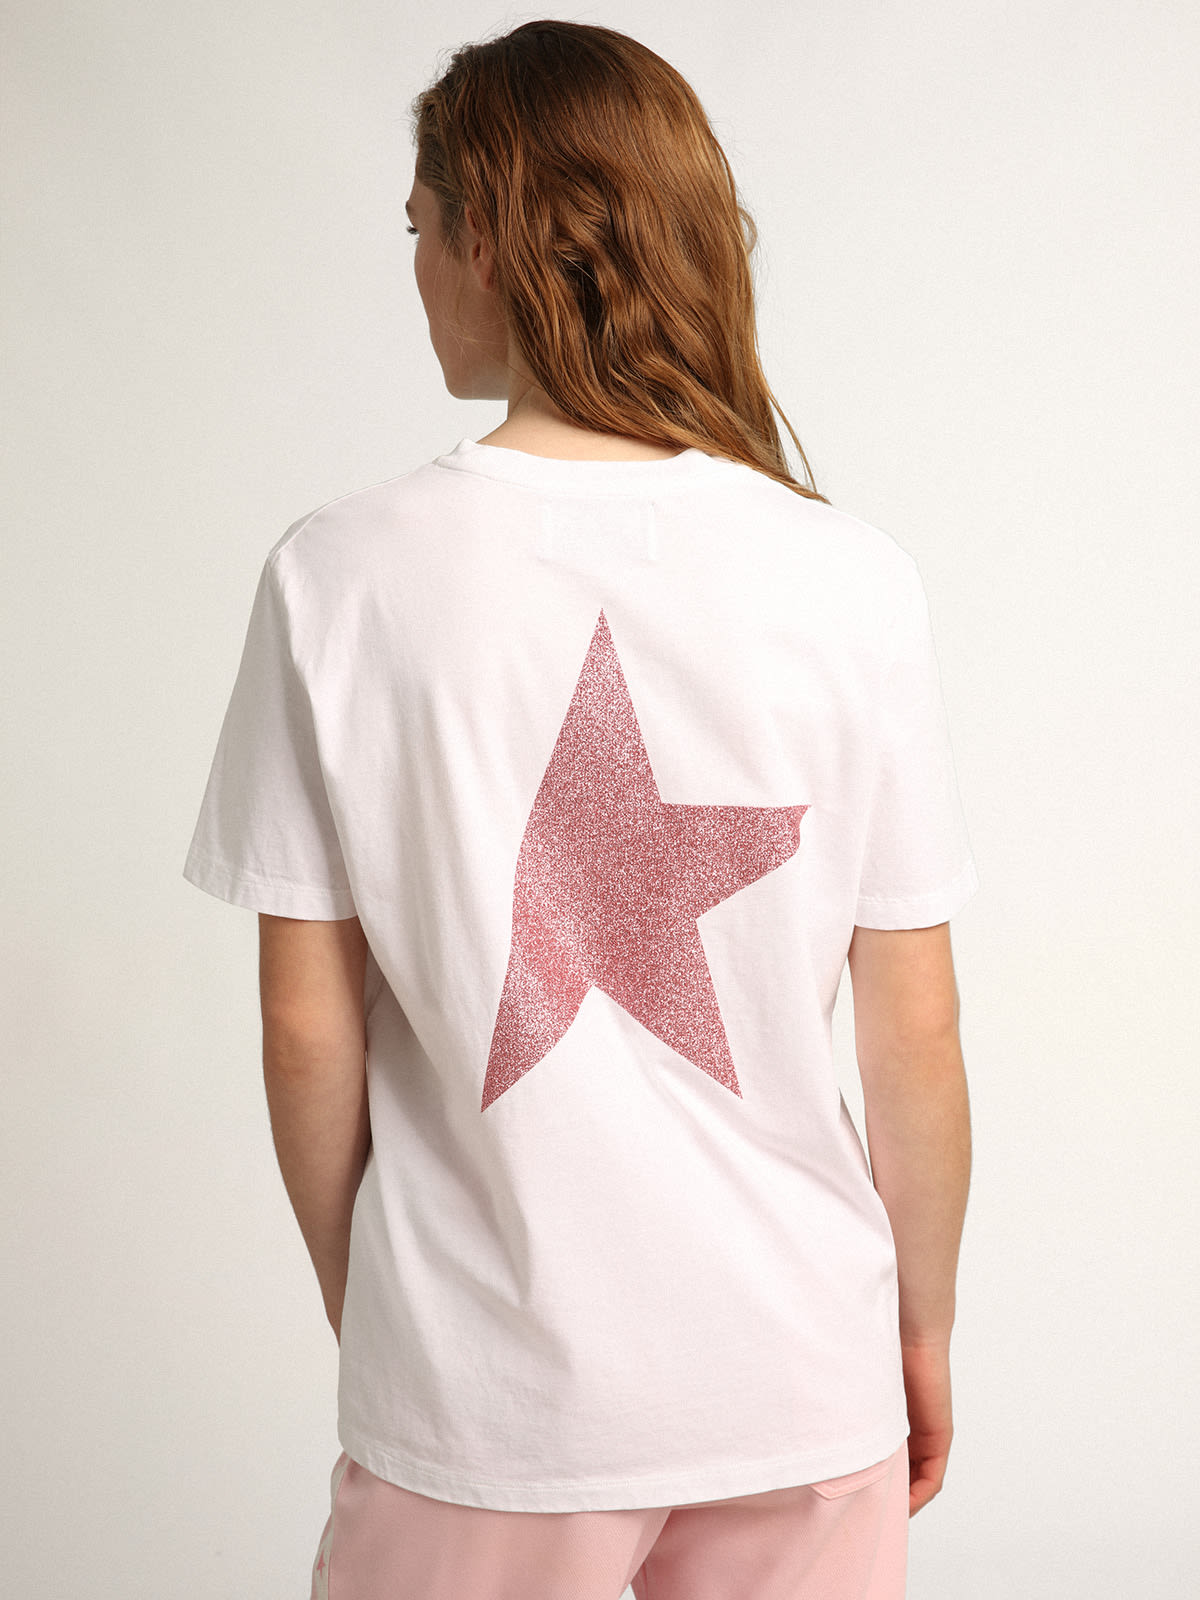 Women's white T-shirt with pink glitter logo and star | Golden Goose